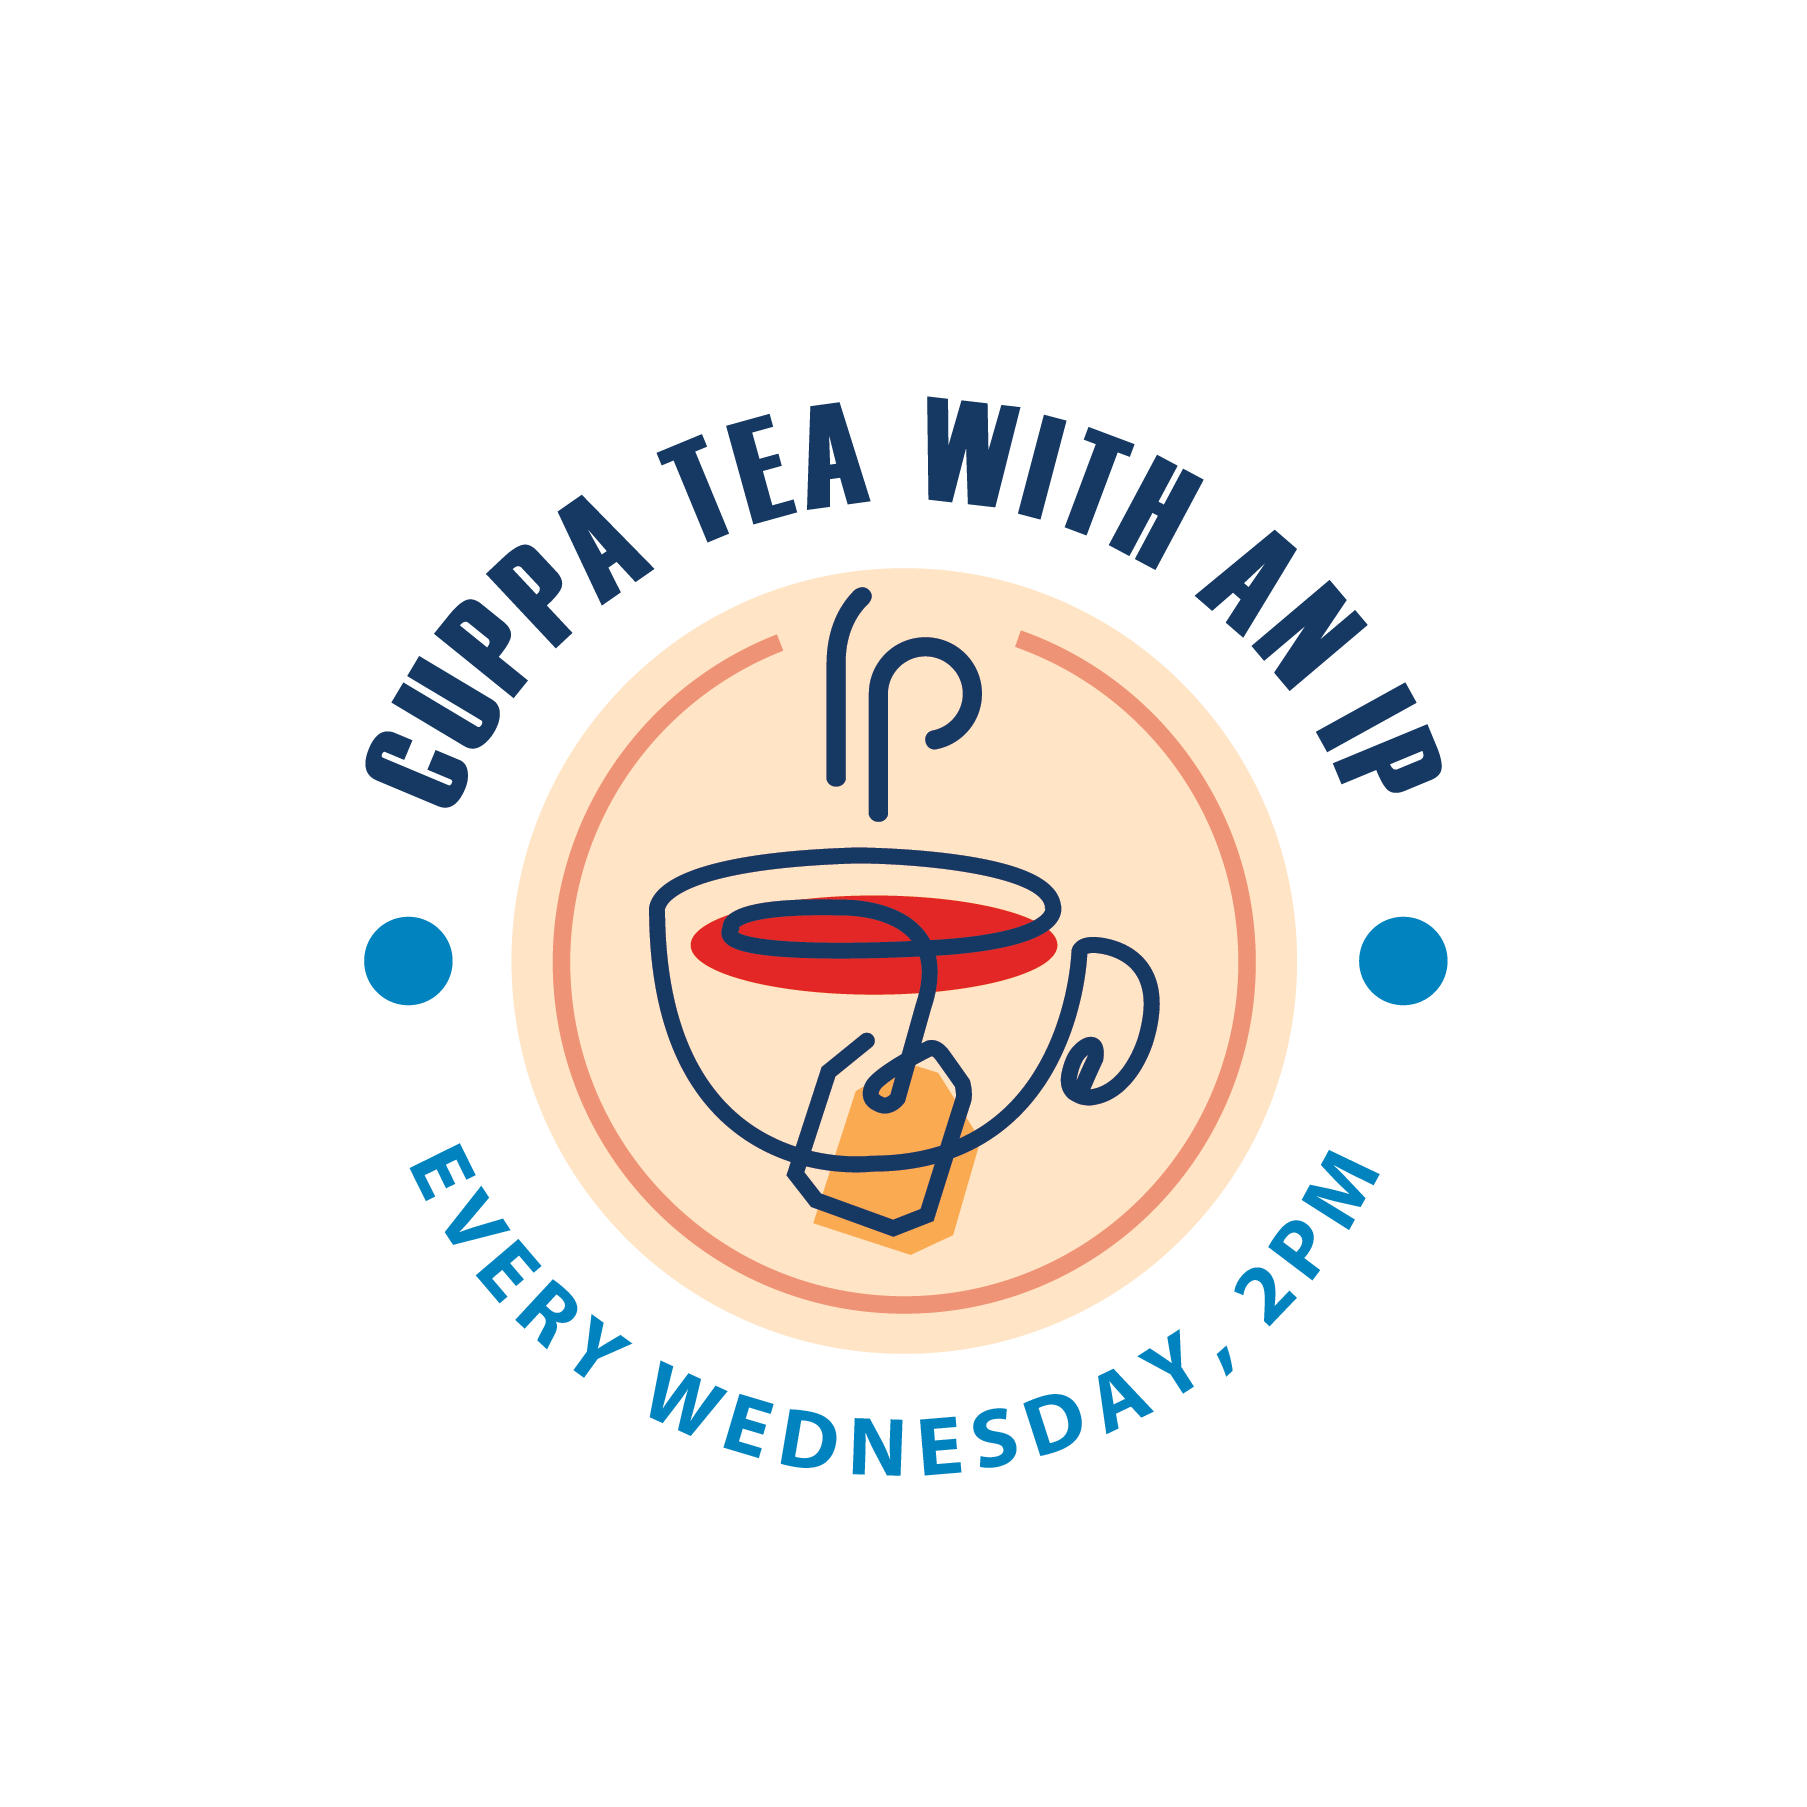 Cuppa Tea with an IP Promo Logo. Image of tea cup and text stating it is every Wednesday at 2:00 PM.